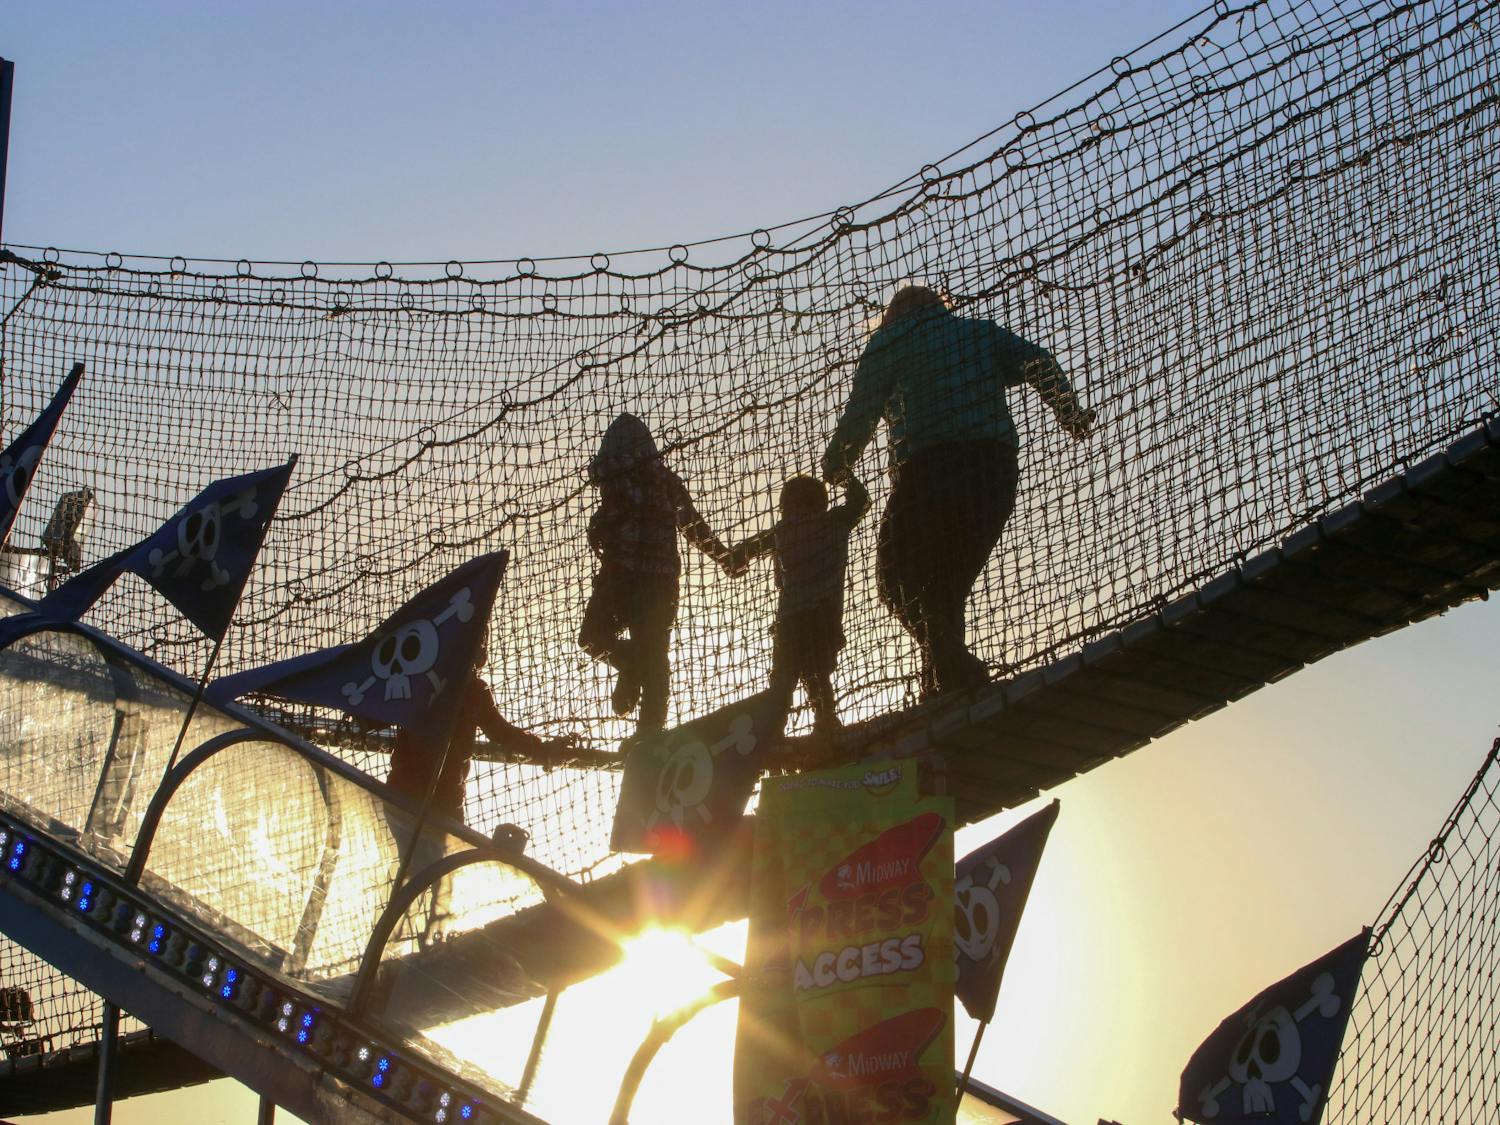 As the sun went down, families made their way across a bridge that was just one part of a bigger jungle gym. While some kids were found speeding across the bridge, this family took their time, hand in hand, to complete the course on Oct. 18, 2022.&nbsp;